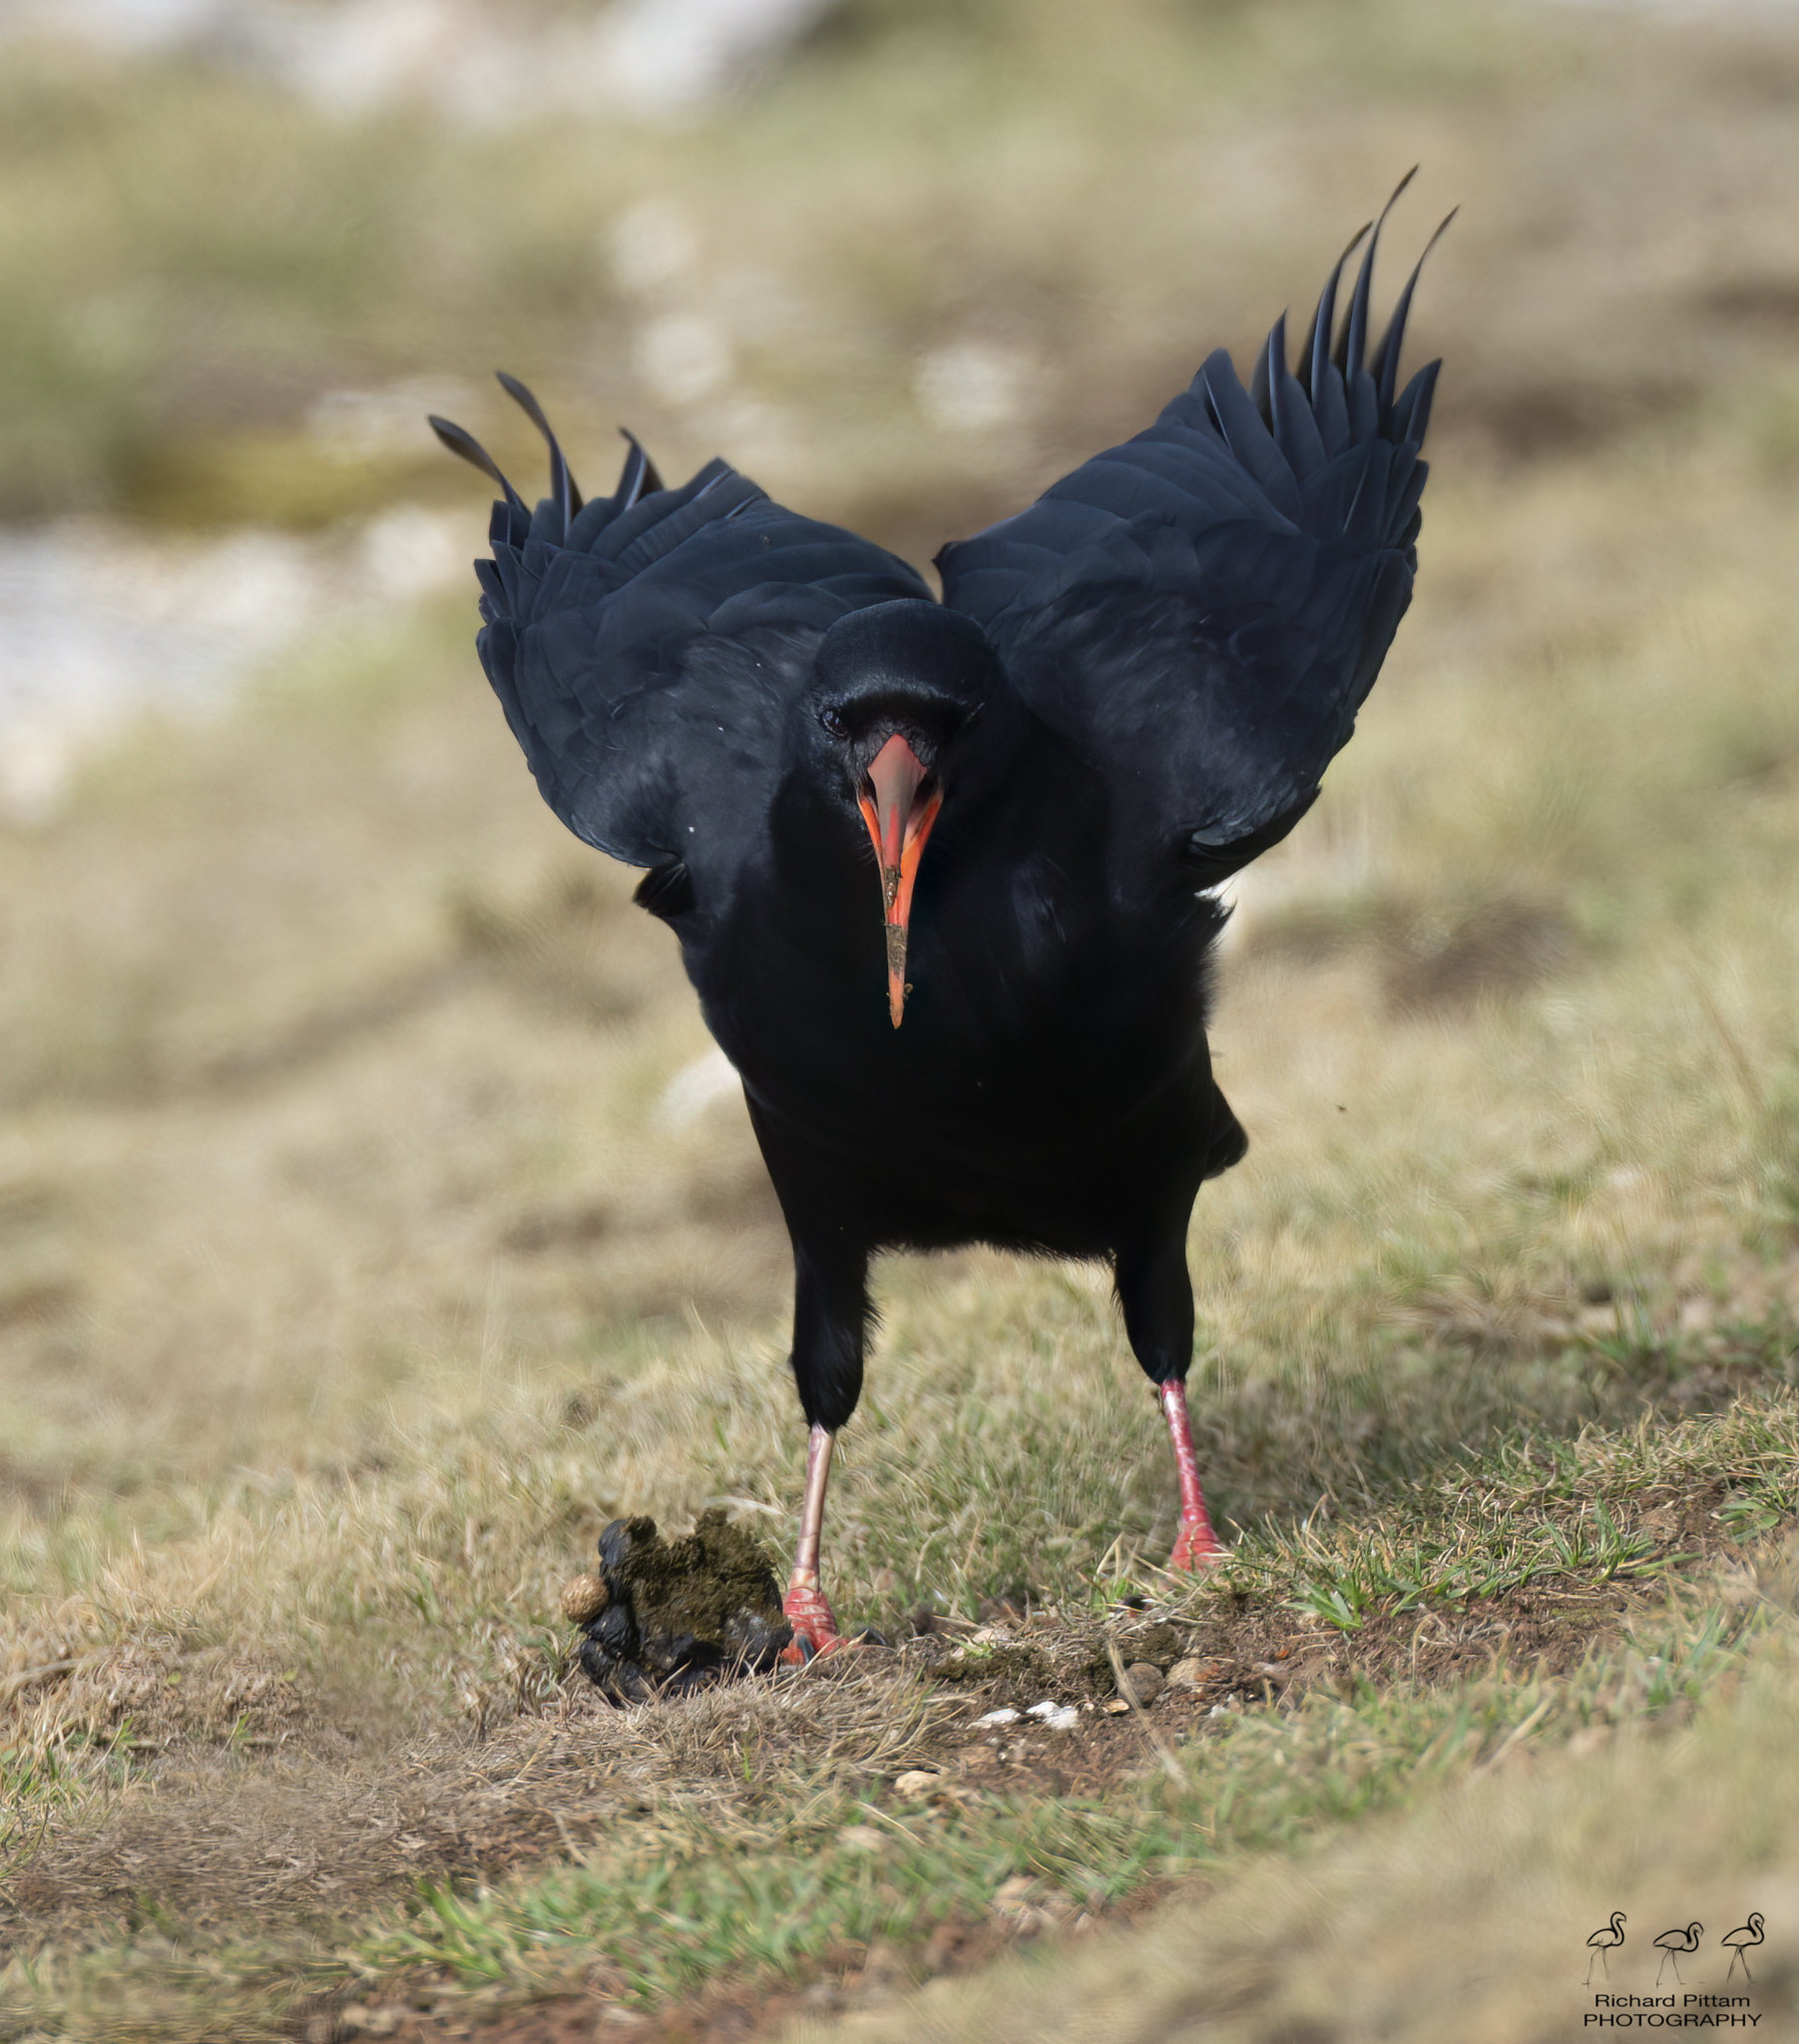 Chough making a call - they look like they are sneezing when they do this, as though they shake all over - fascinating behaviour